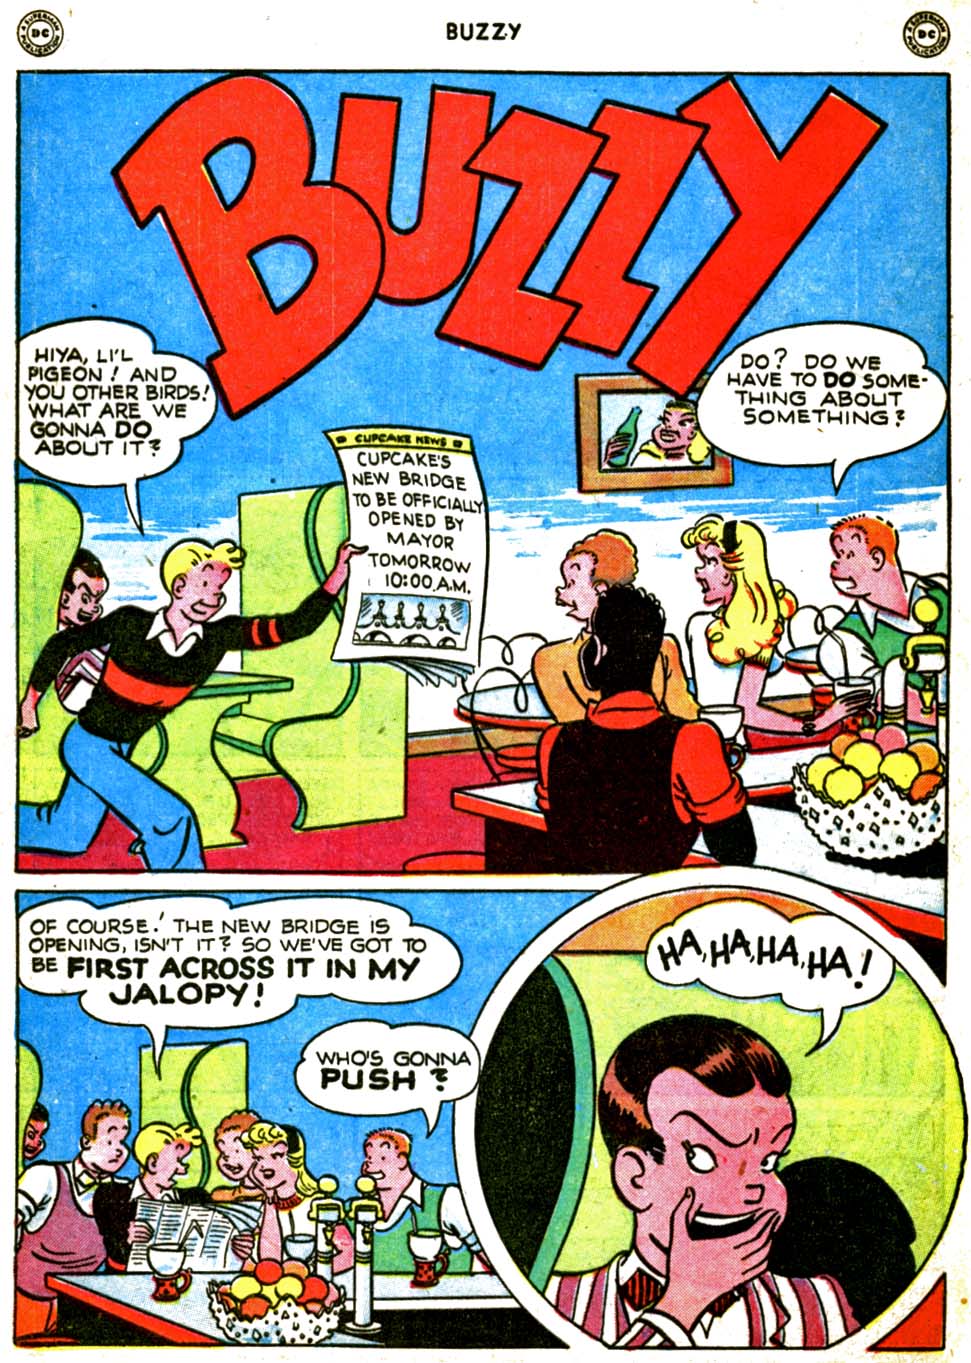 Read online Buzzy comic -  Issue #20 - 42